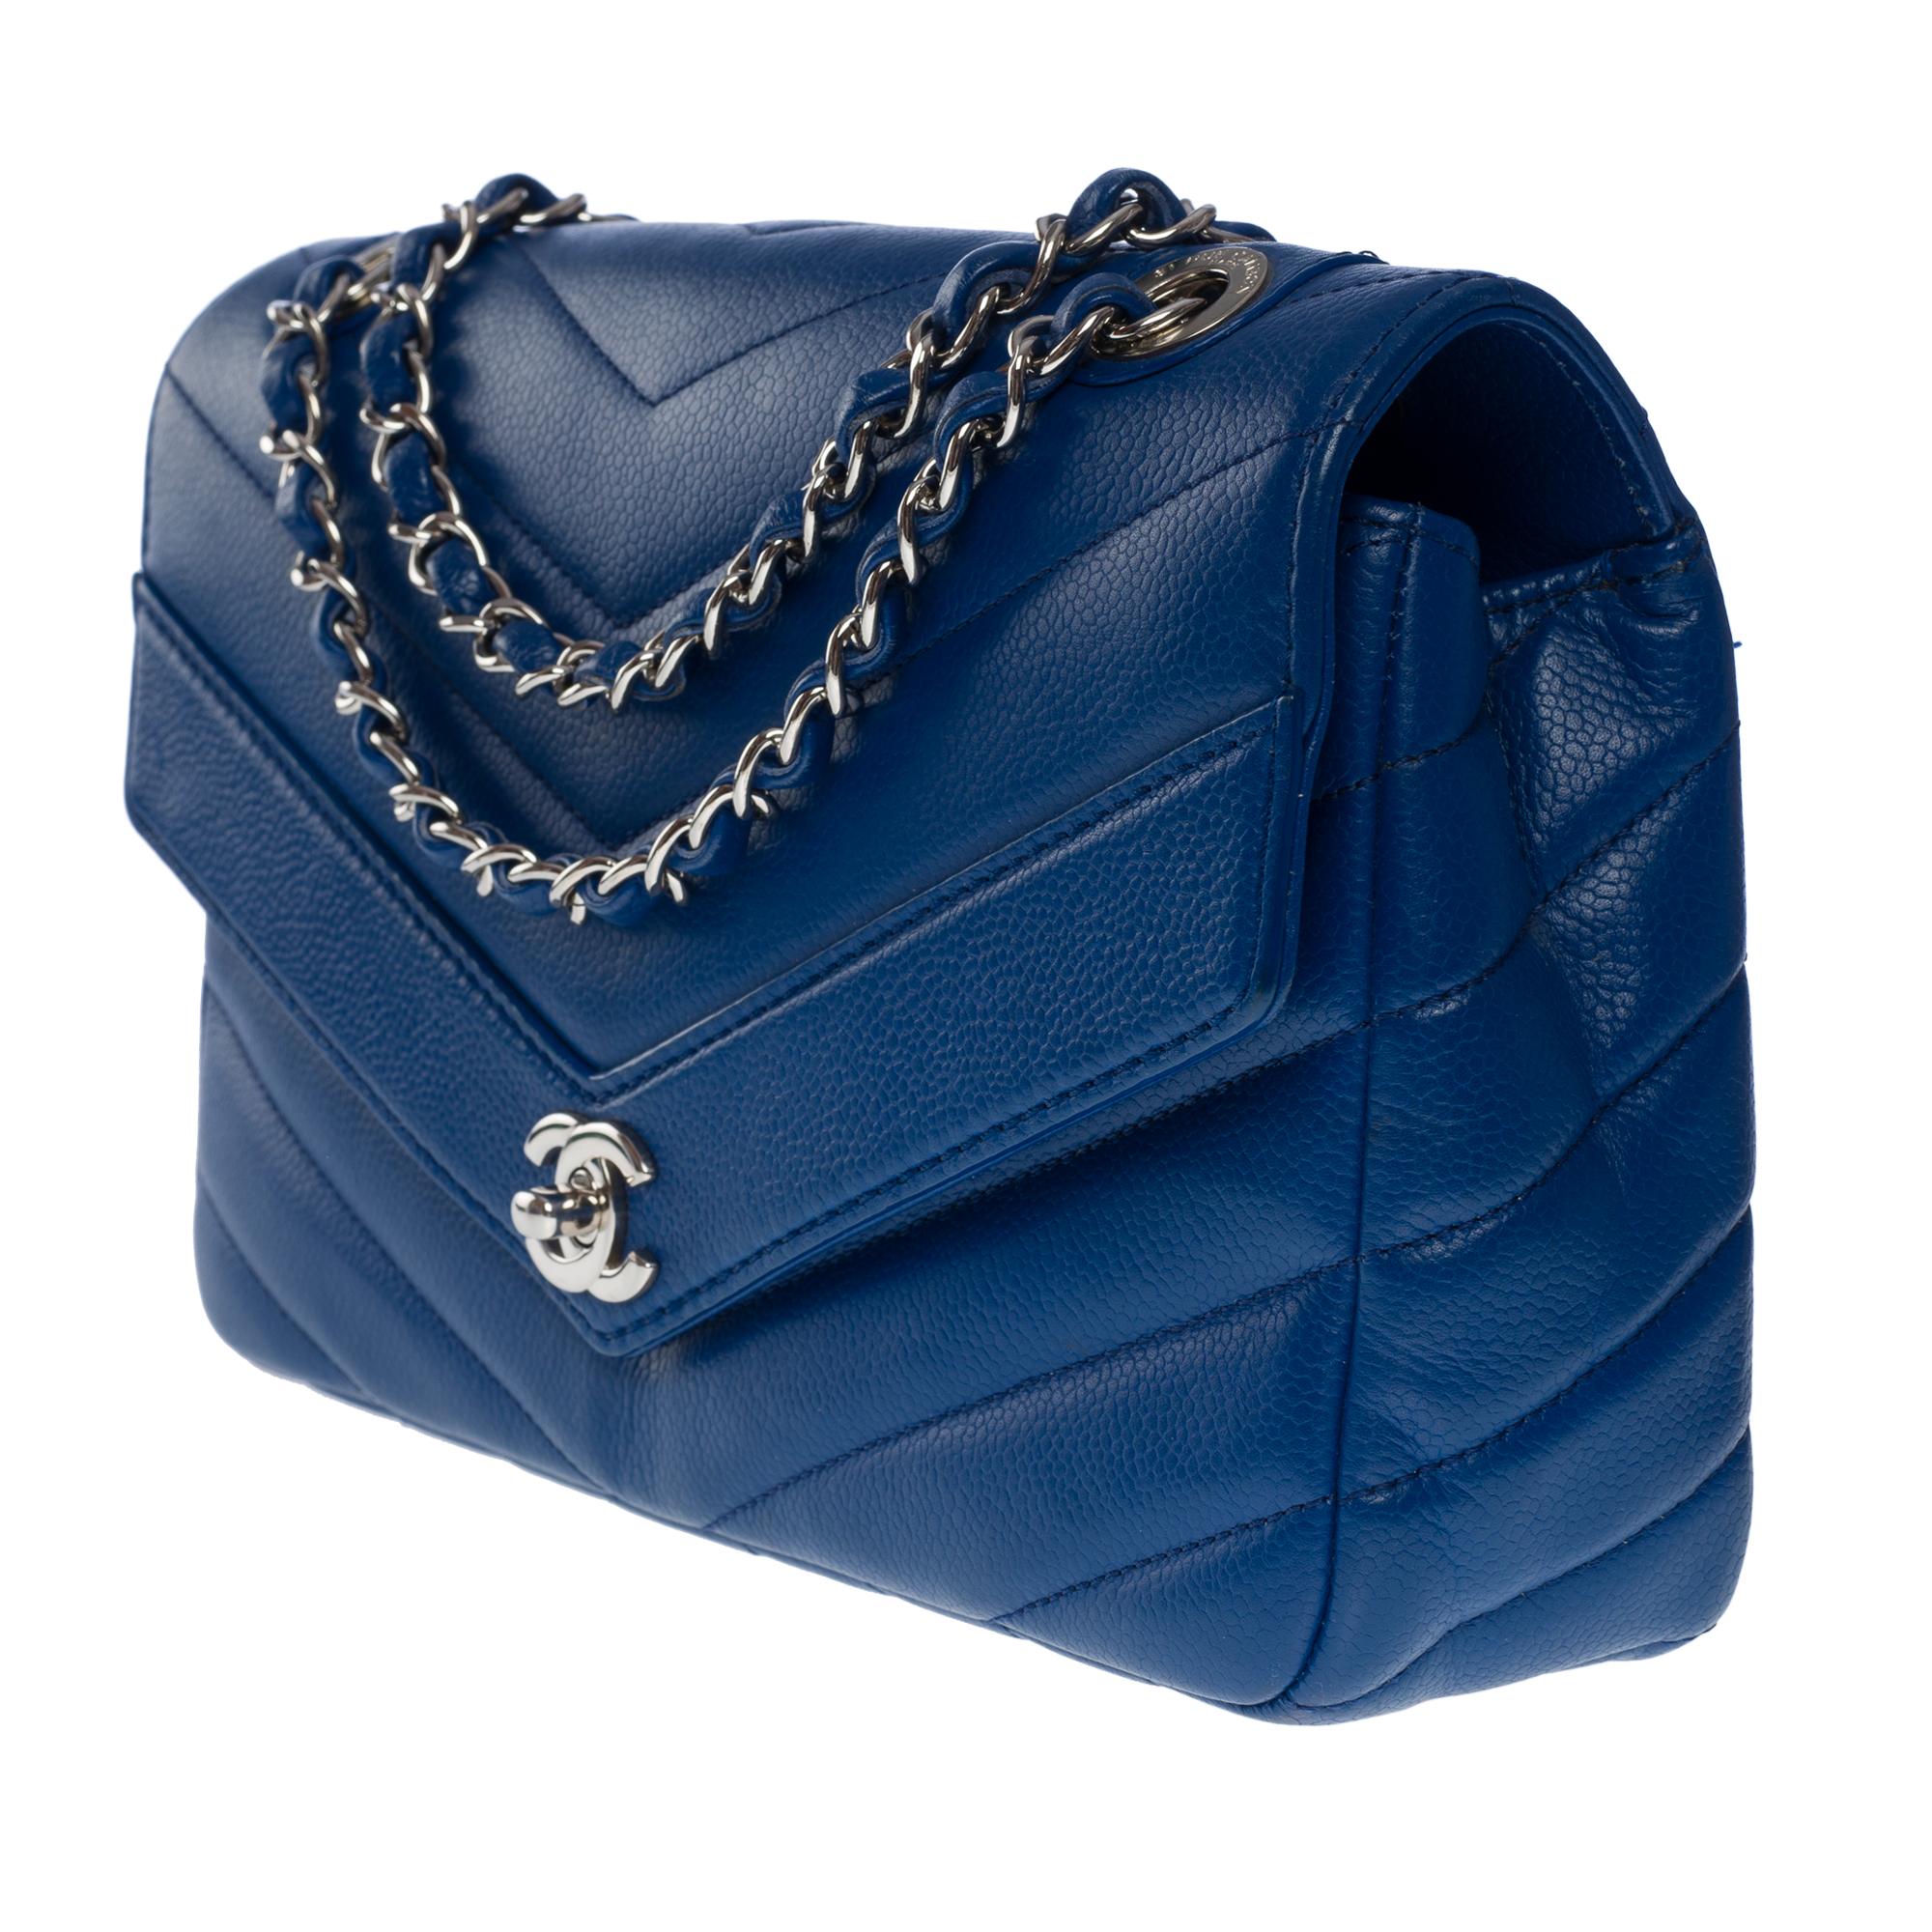 Women's Chanel Classic shoulder flap bag in blue herringbone quilted caviar leather, SHW For Sale